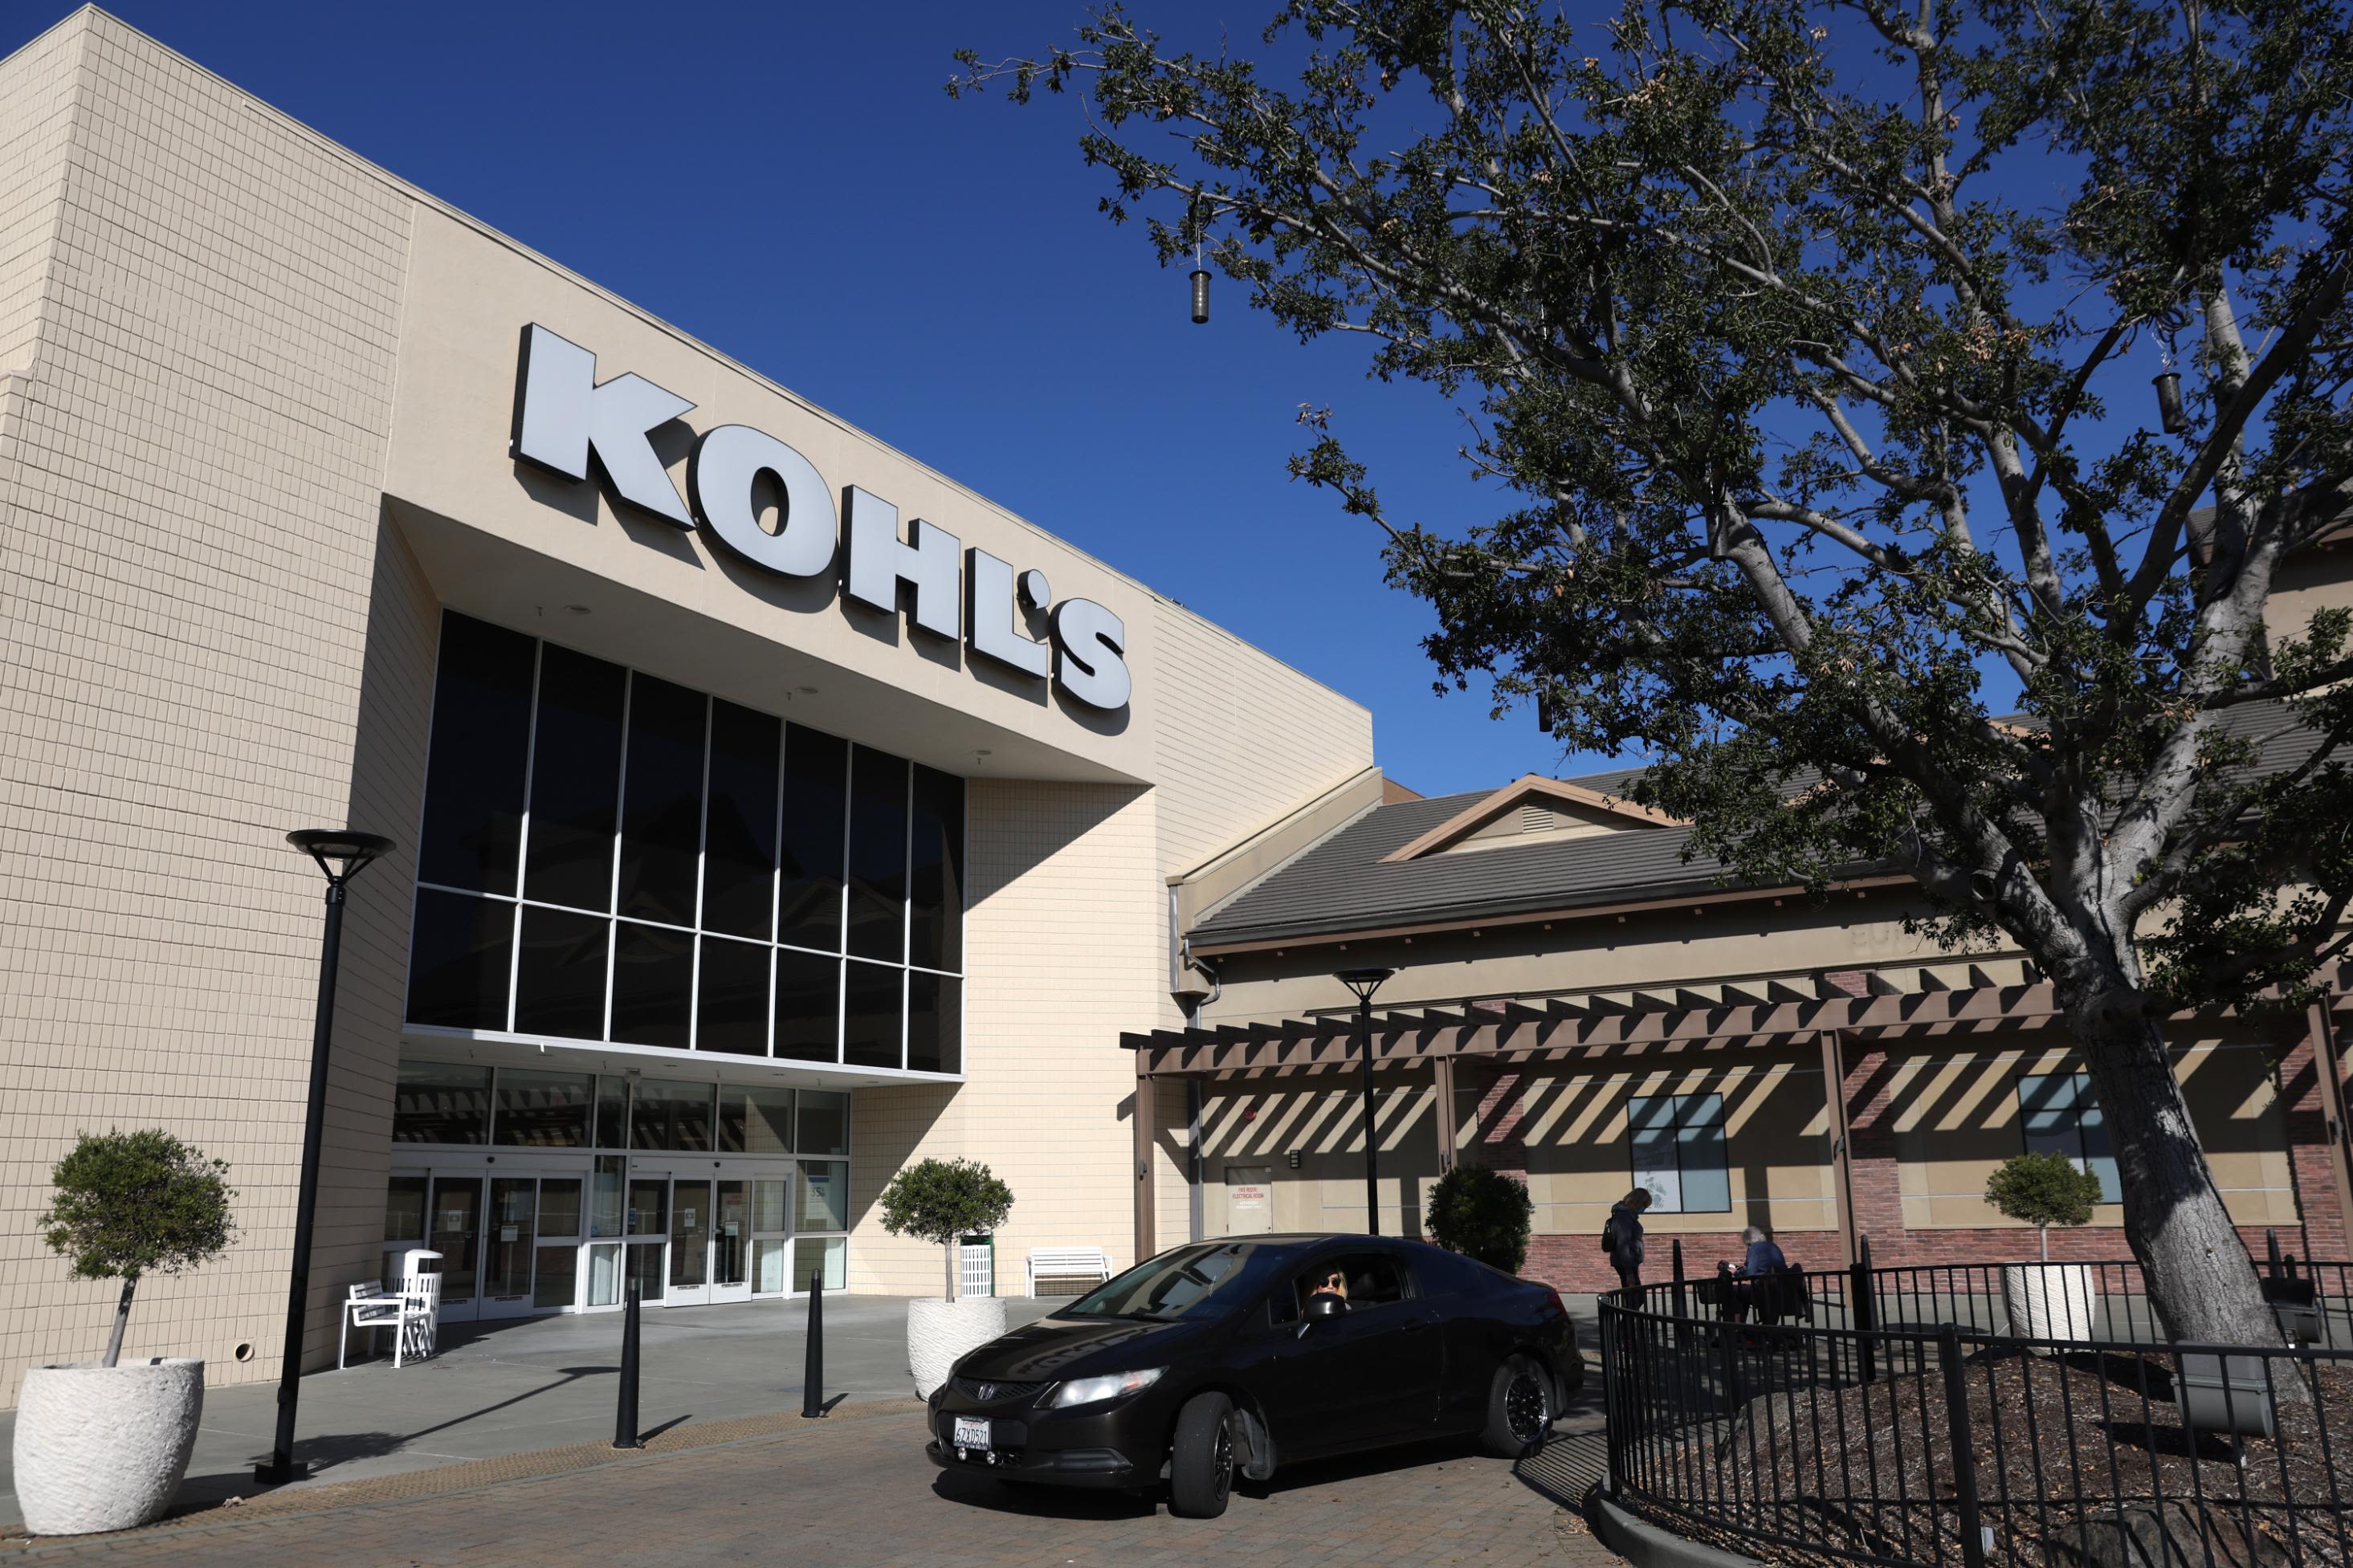 Last Minute Holiday Shopping Made Easy at Kohl's – Extended Store